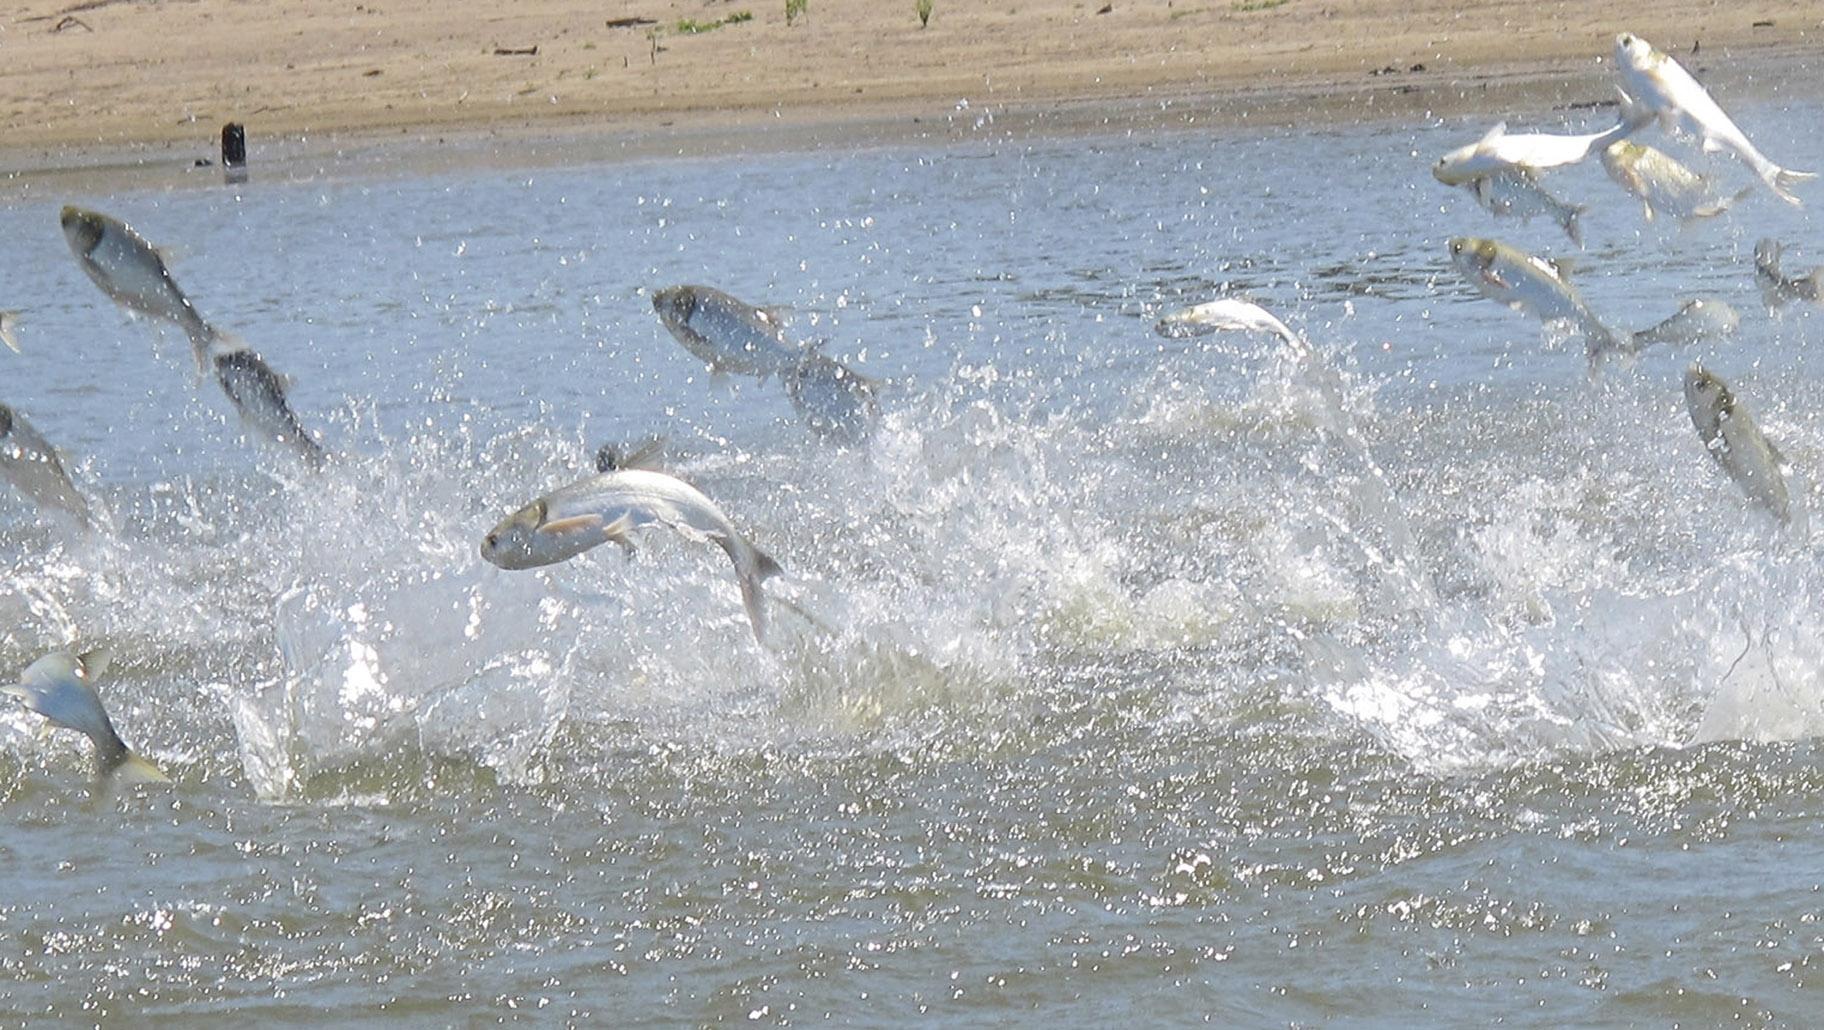 In this June 13, 2012 file photo, invasive carp, jolted by an electric current from a research boat, jump from the Illinois River near Havana, Ill. (AP Photo / John Flesher, file)